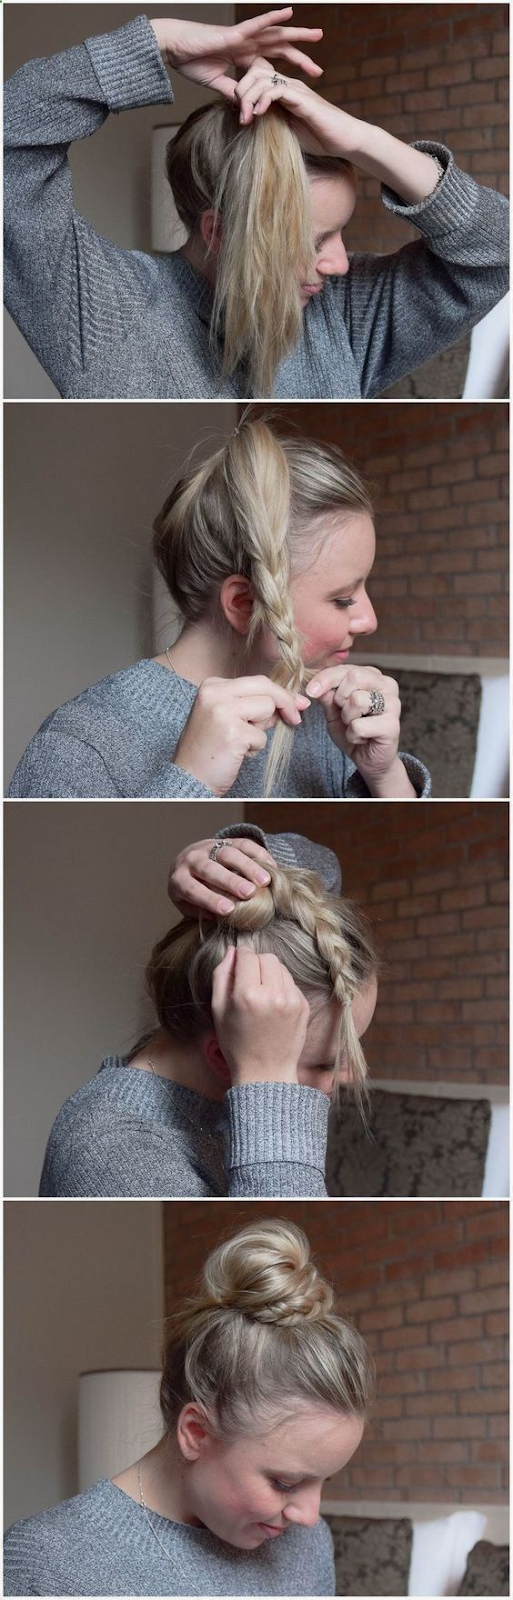 Learn how to do an up-do for medium length hair! These six hairstyles are perfect for hot summer days. #updo #mediumhair #hairstyle #easy #FormalNormal